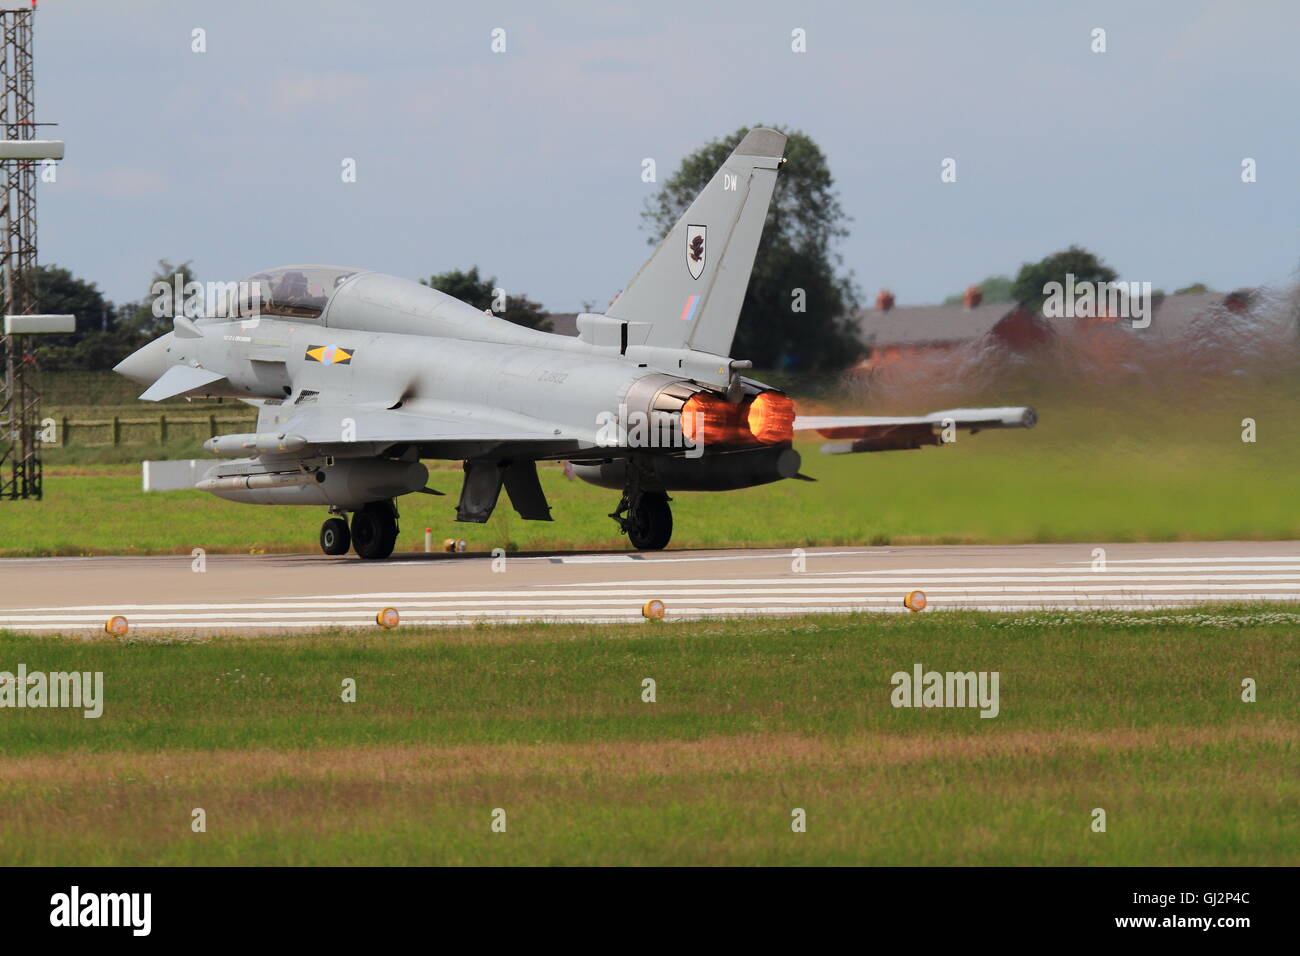 Royal Air Force Tyhpoon using after burners to take off. Stock Photo